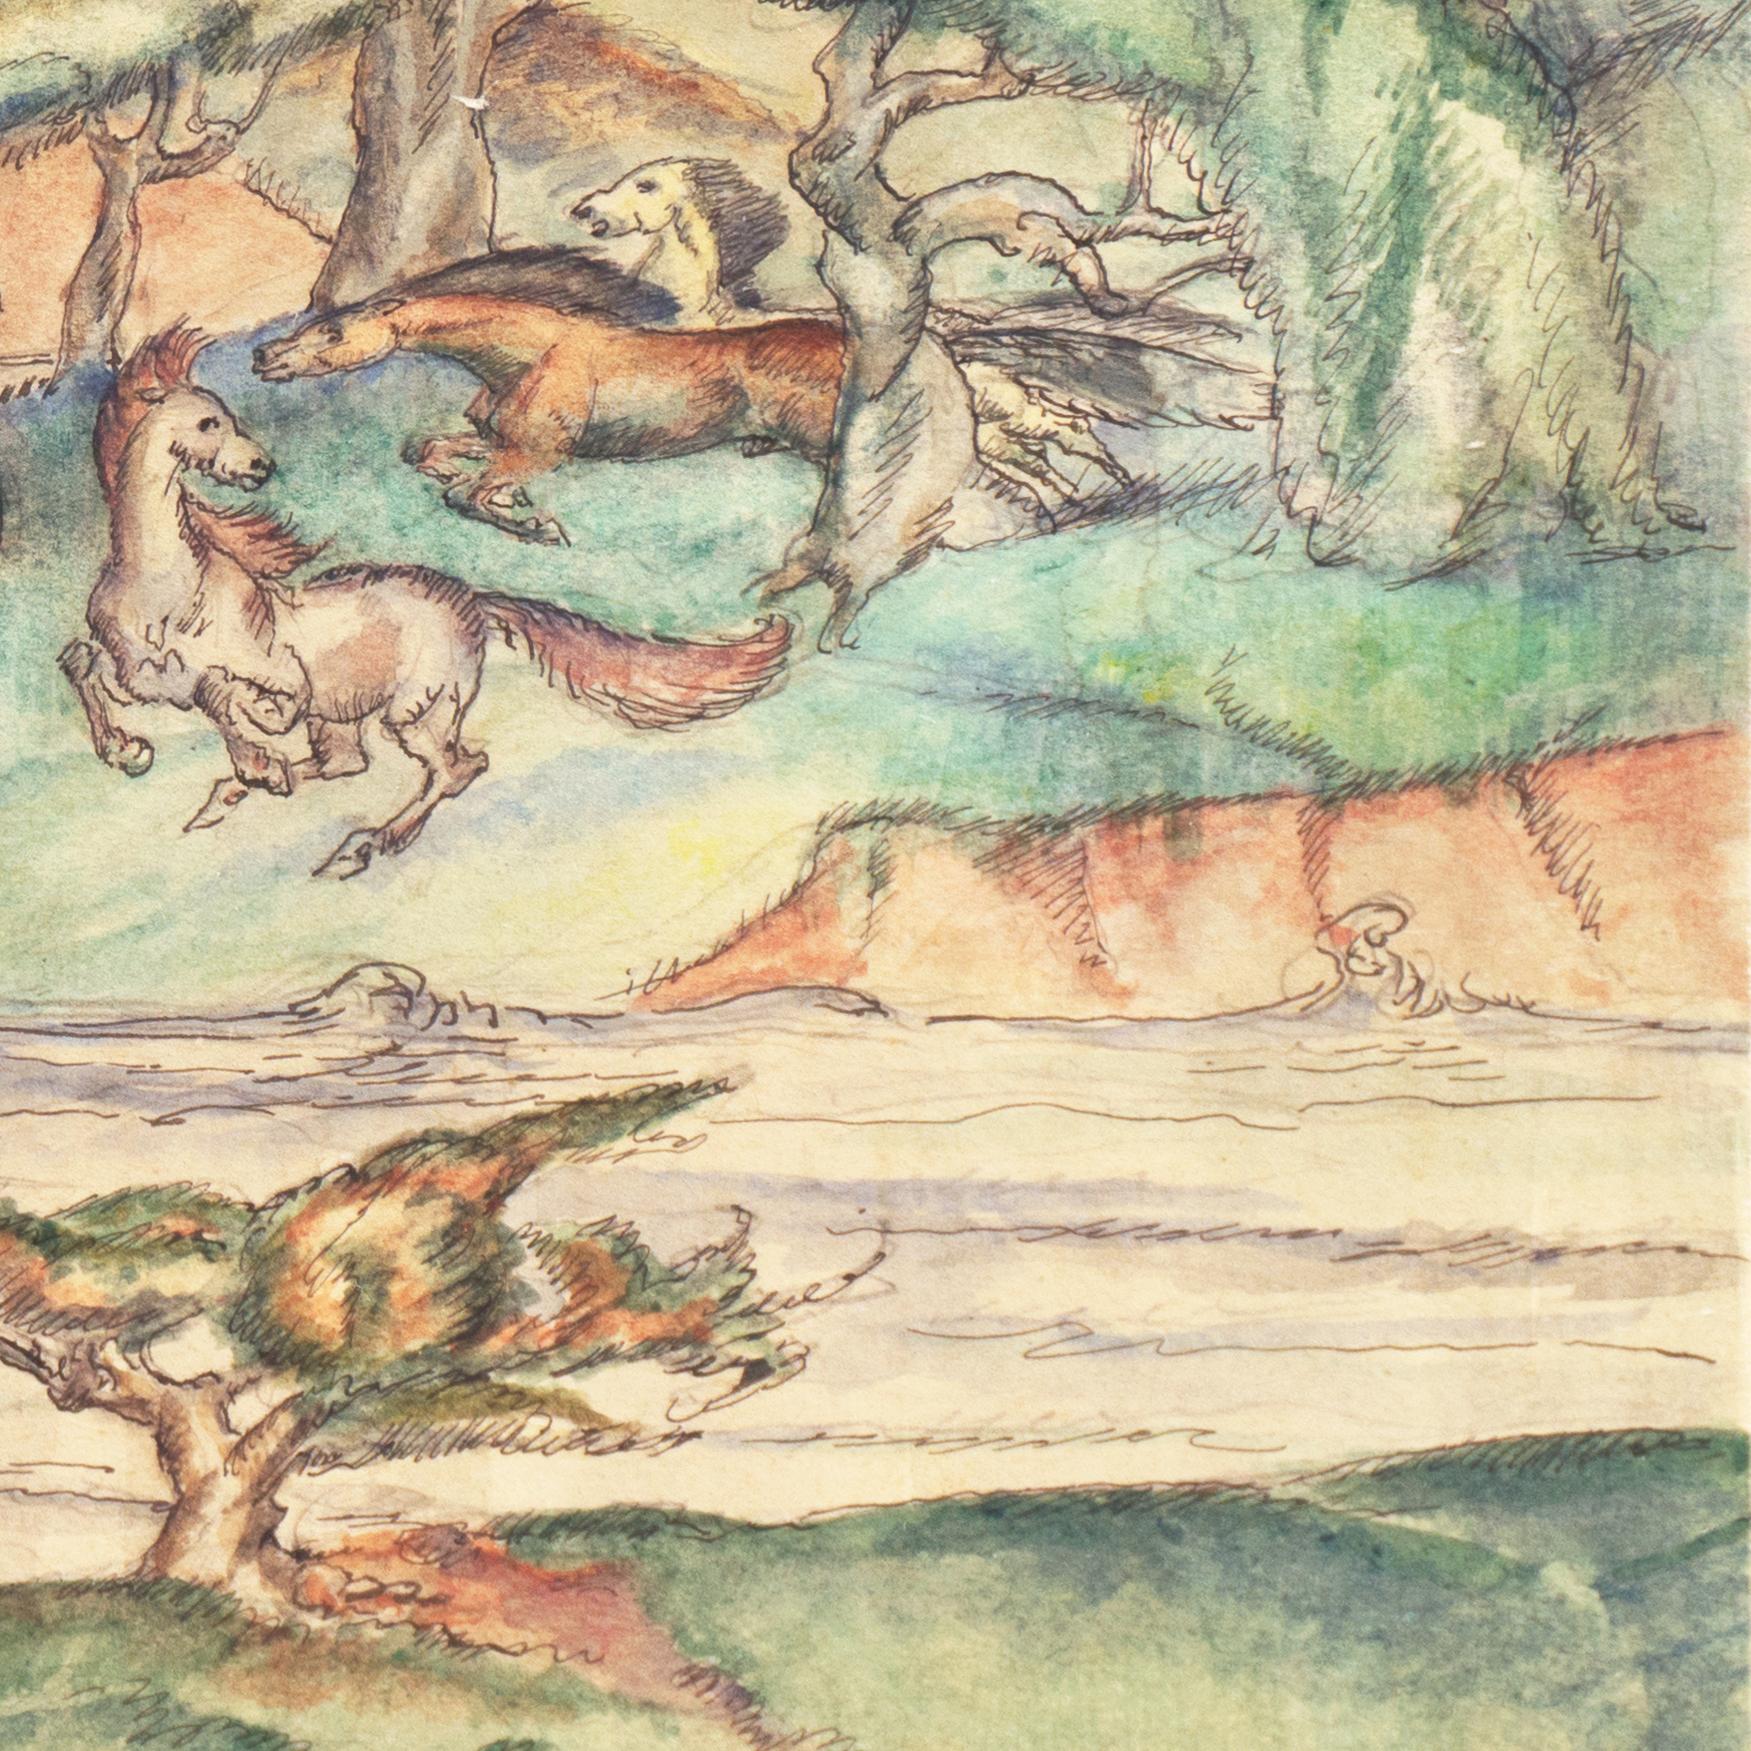 A delicate, Art Deco derived, figural landscape showing a man seated on a riverbank with a stag standing in a copse of trees and wild horses playing in the distance. Signed lower right, 'Kay H. Nebel' for Kay Heinrich Nebel (German, 1888-1953) and